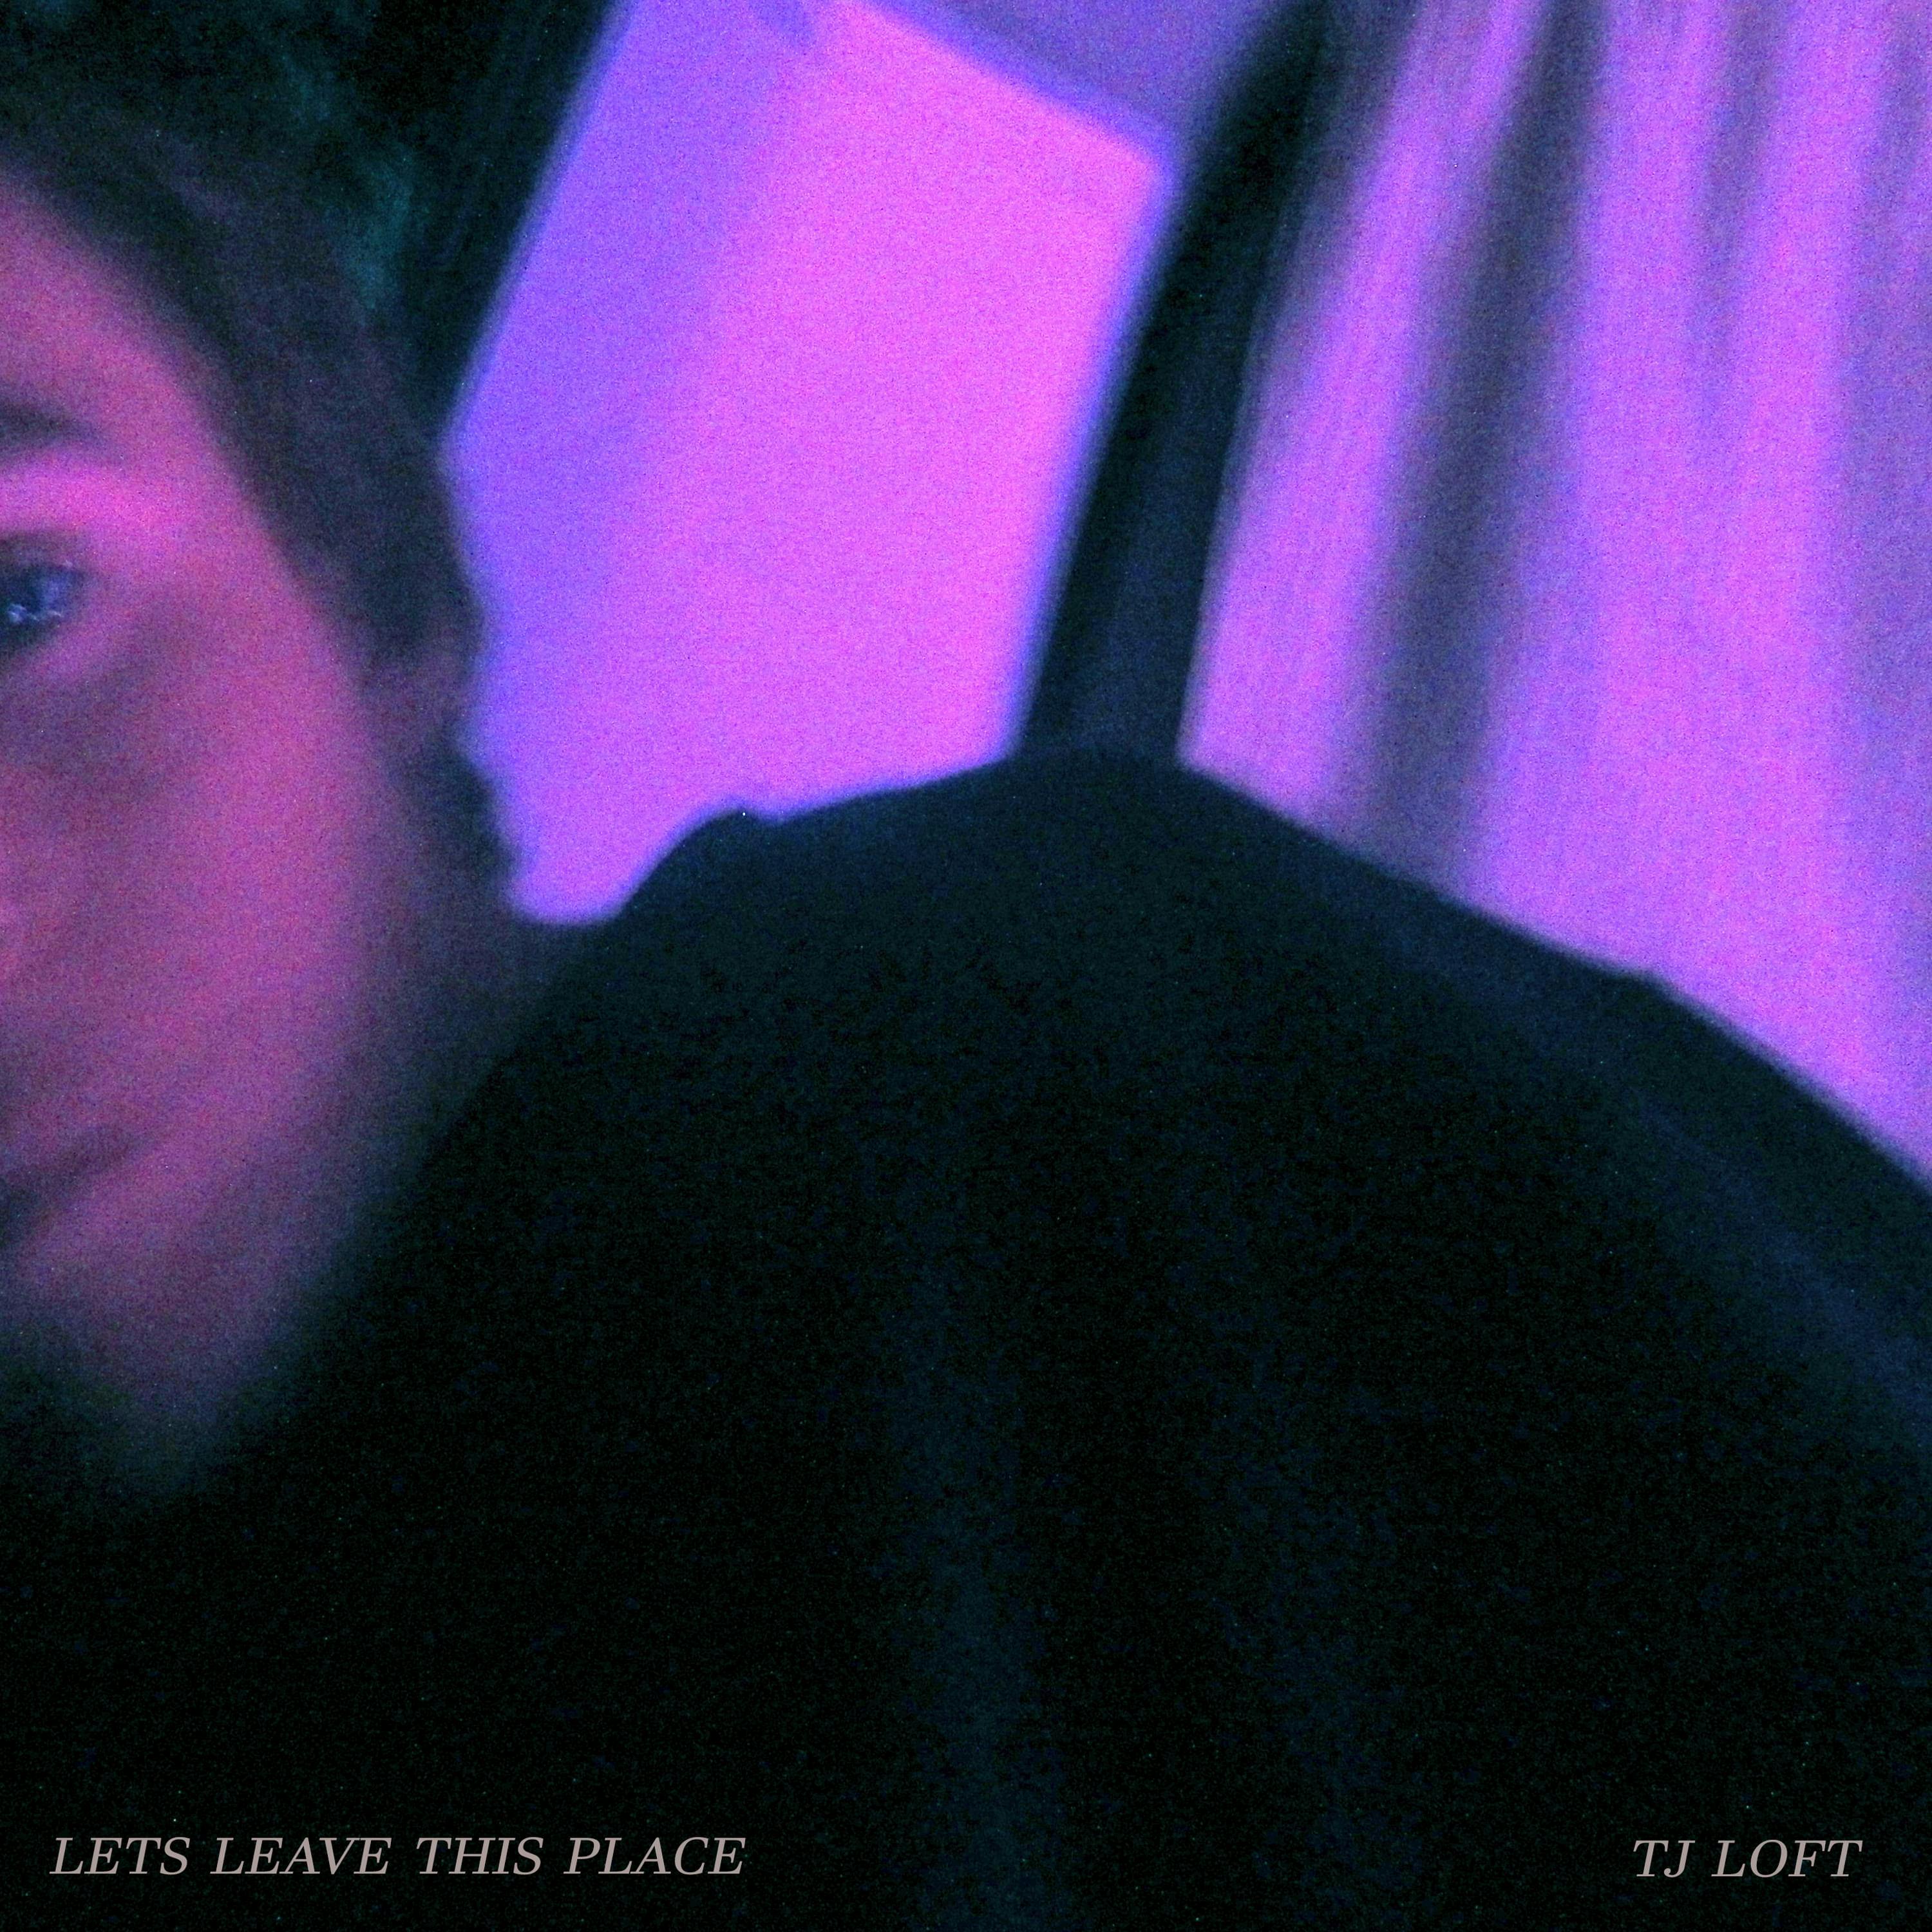 Cover art for Tj Loft's song: Let's Leave This Place